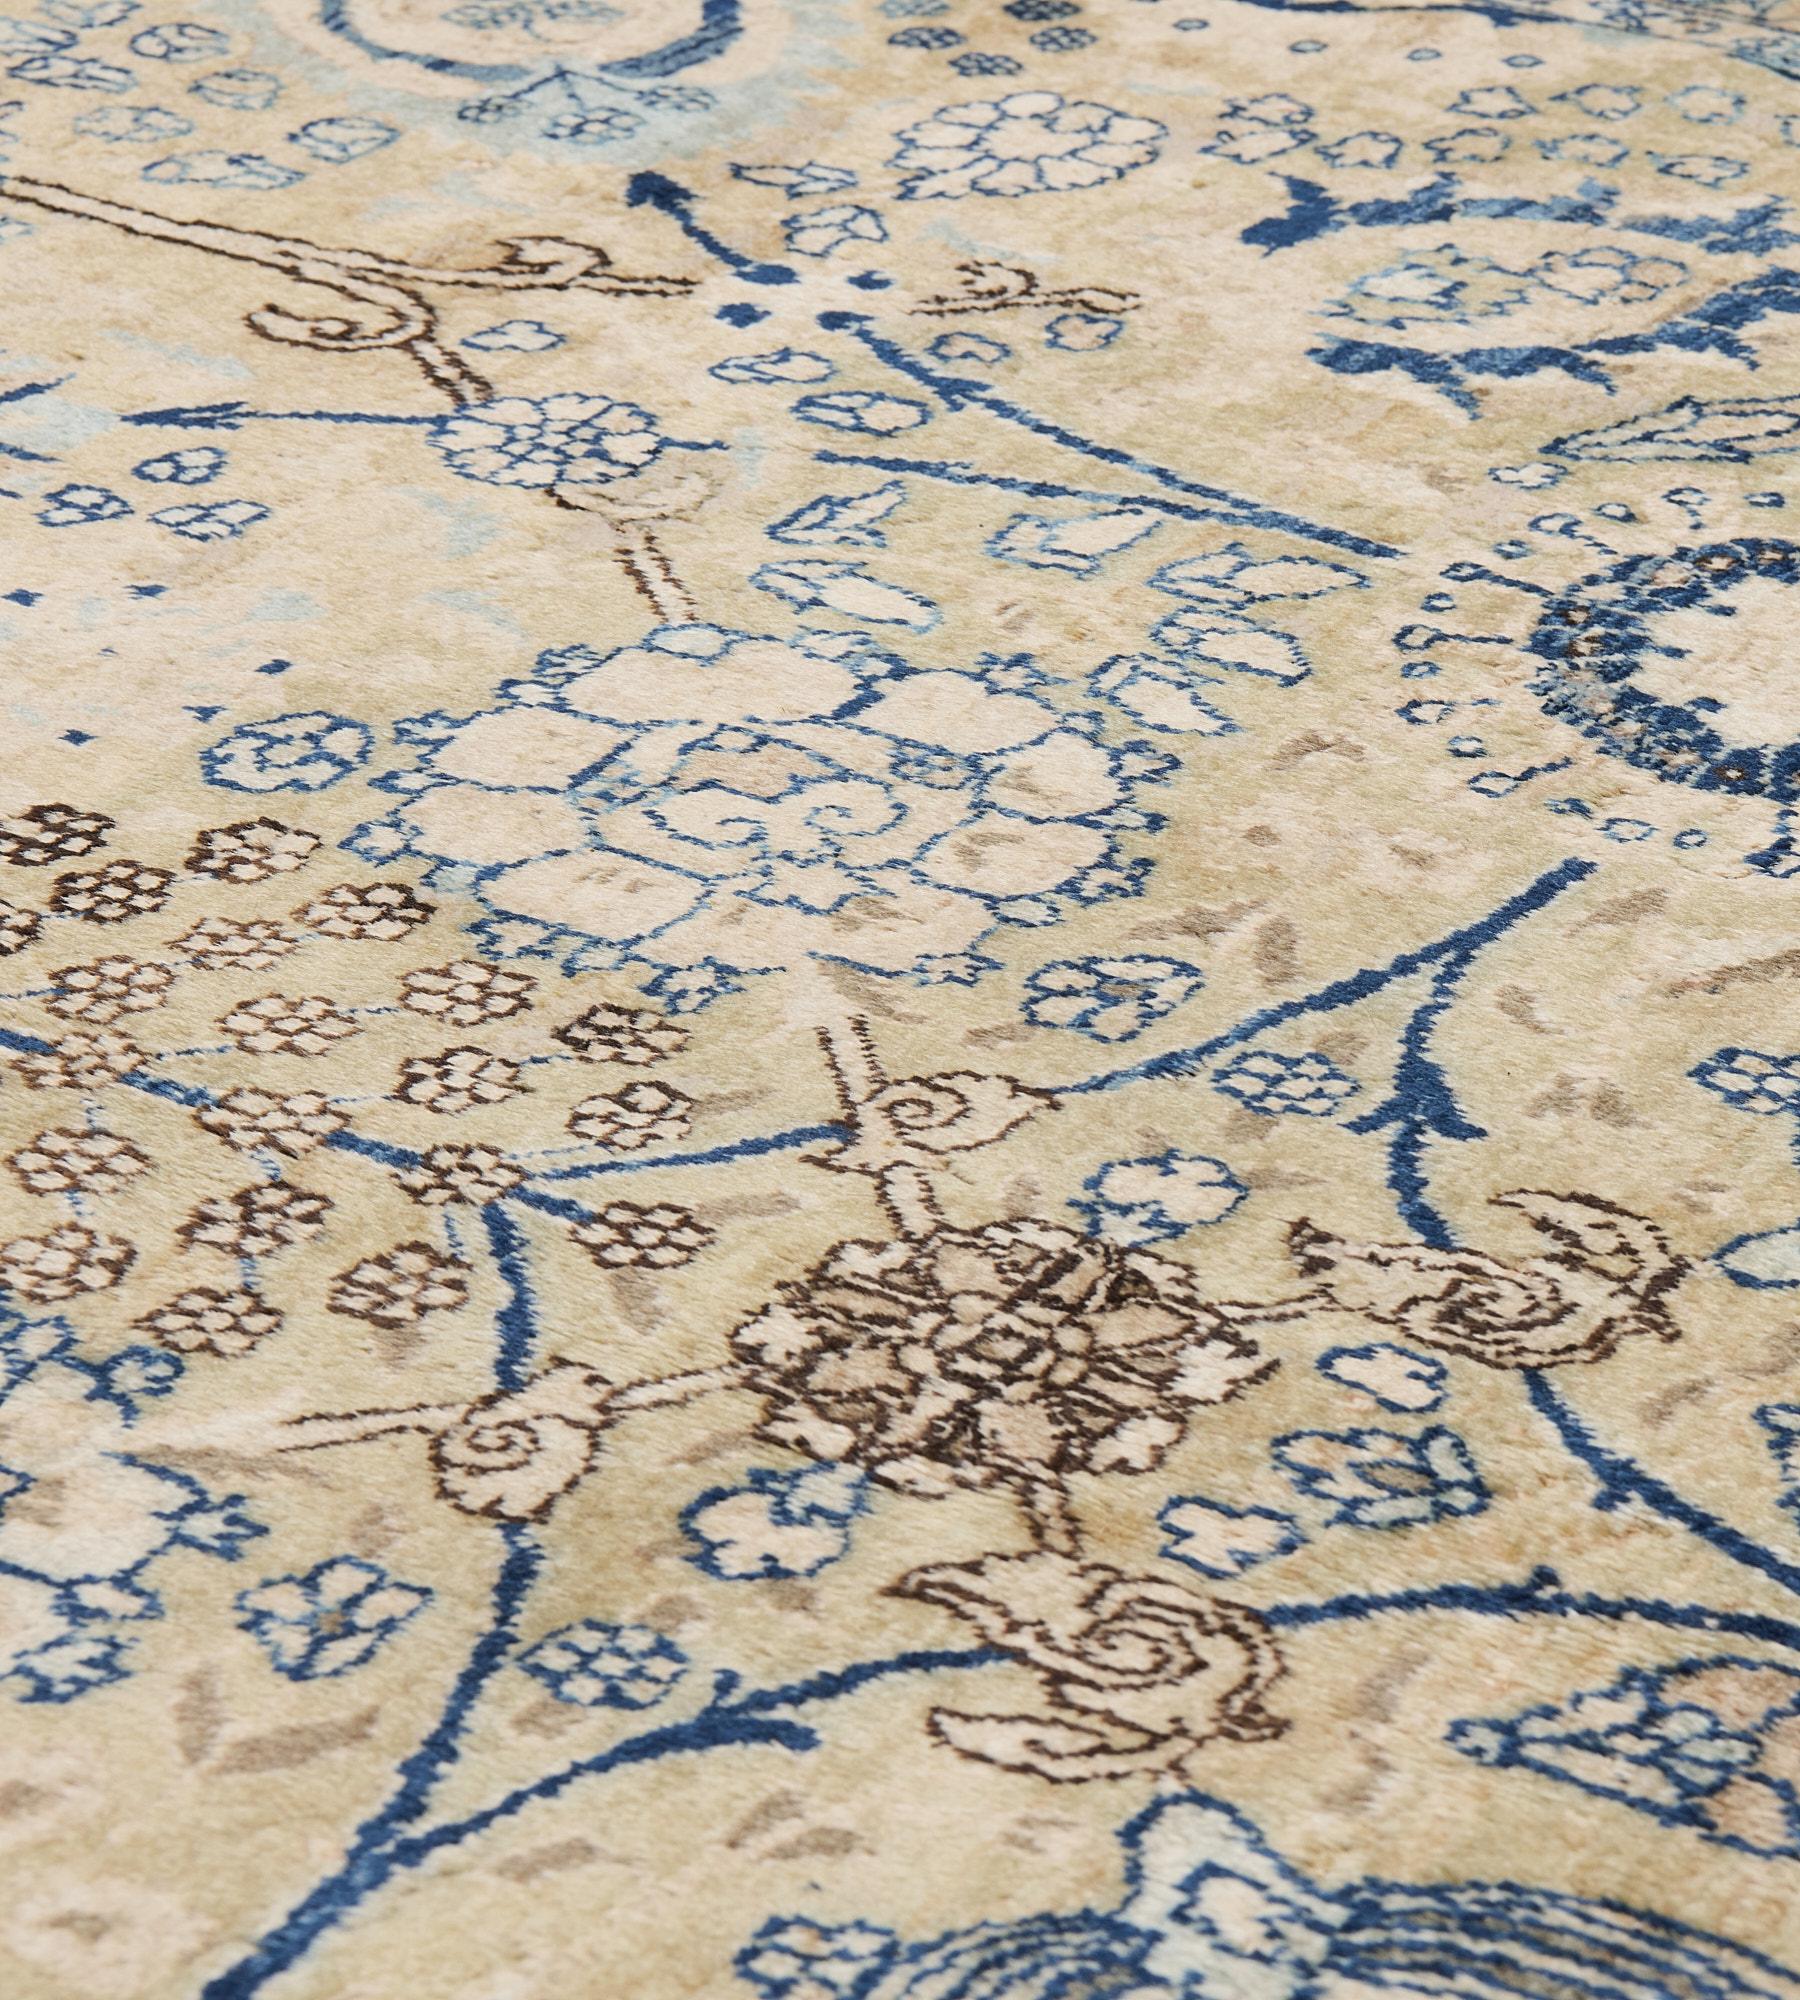 Traditional Hand-woven Blue & Ivory Floral Persian Tabriz Rug In Good Condition For Sale In West Hollywood, CA